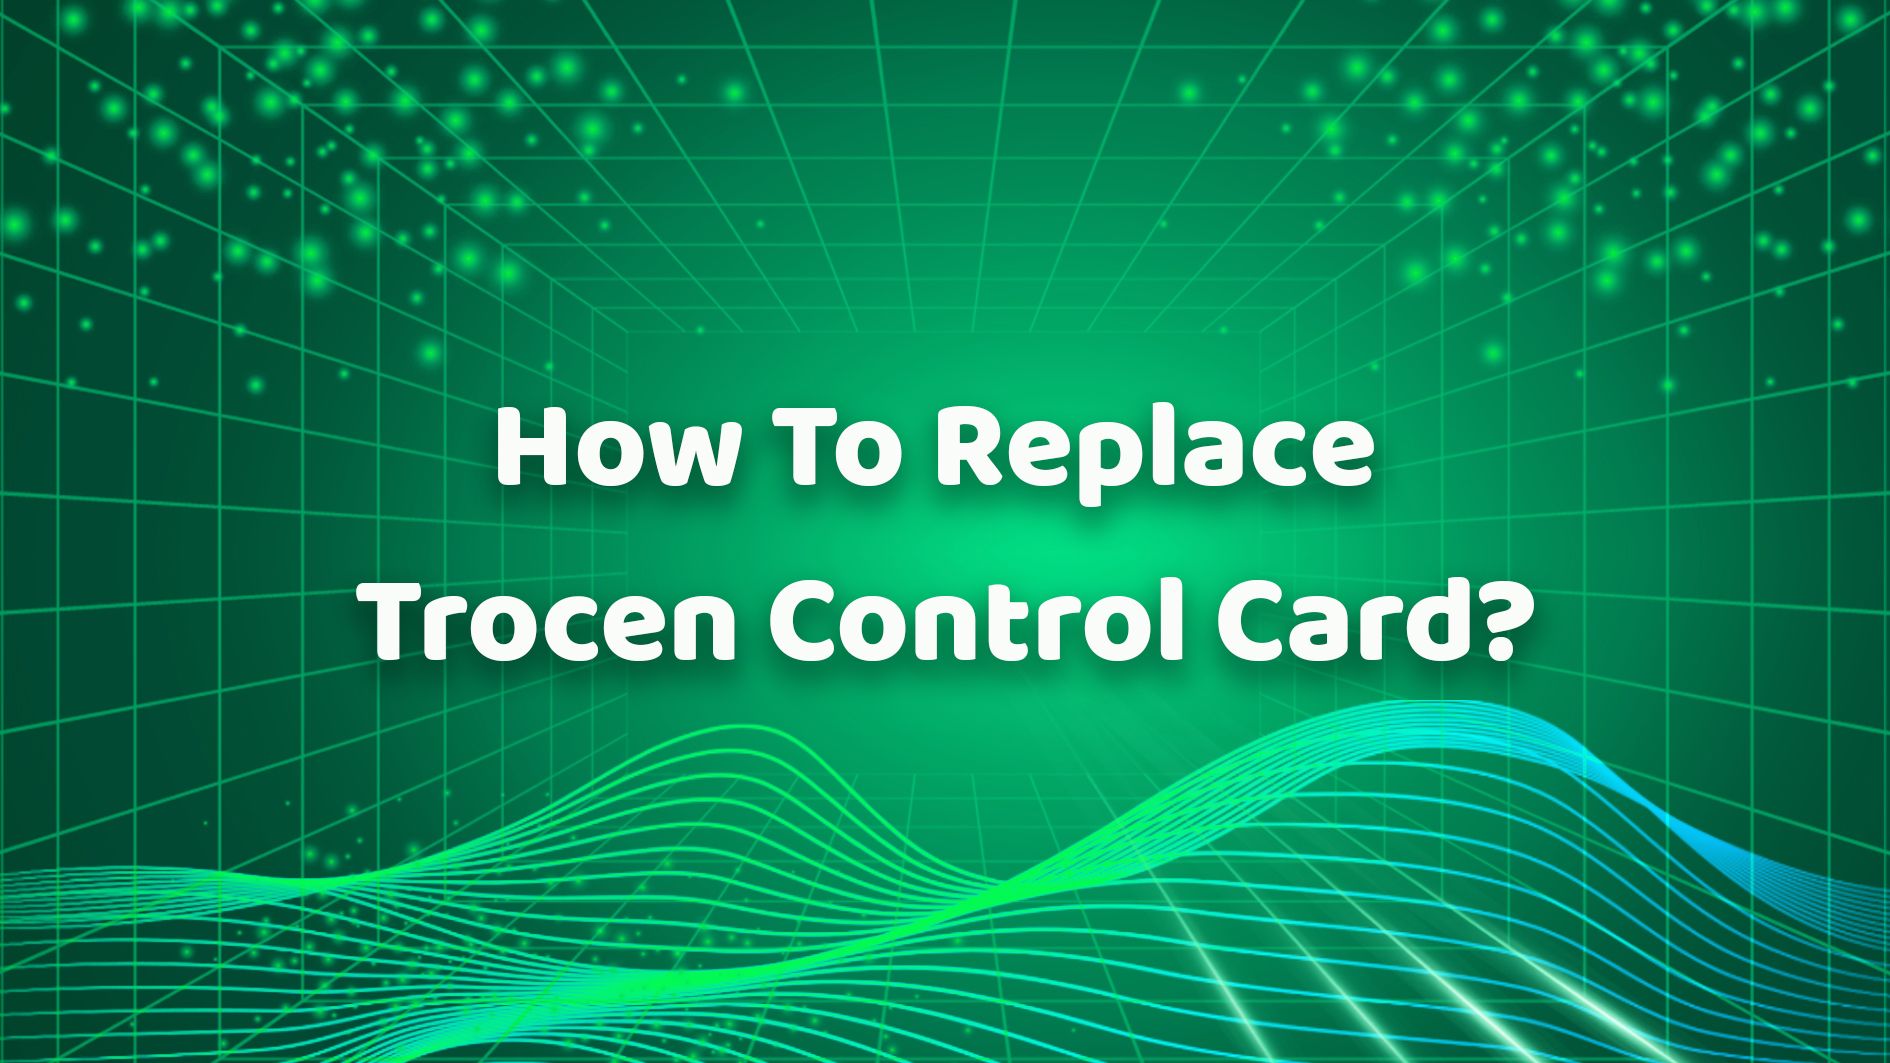 How To Replace Trocen Control Card？